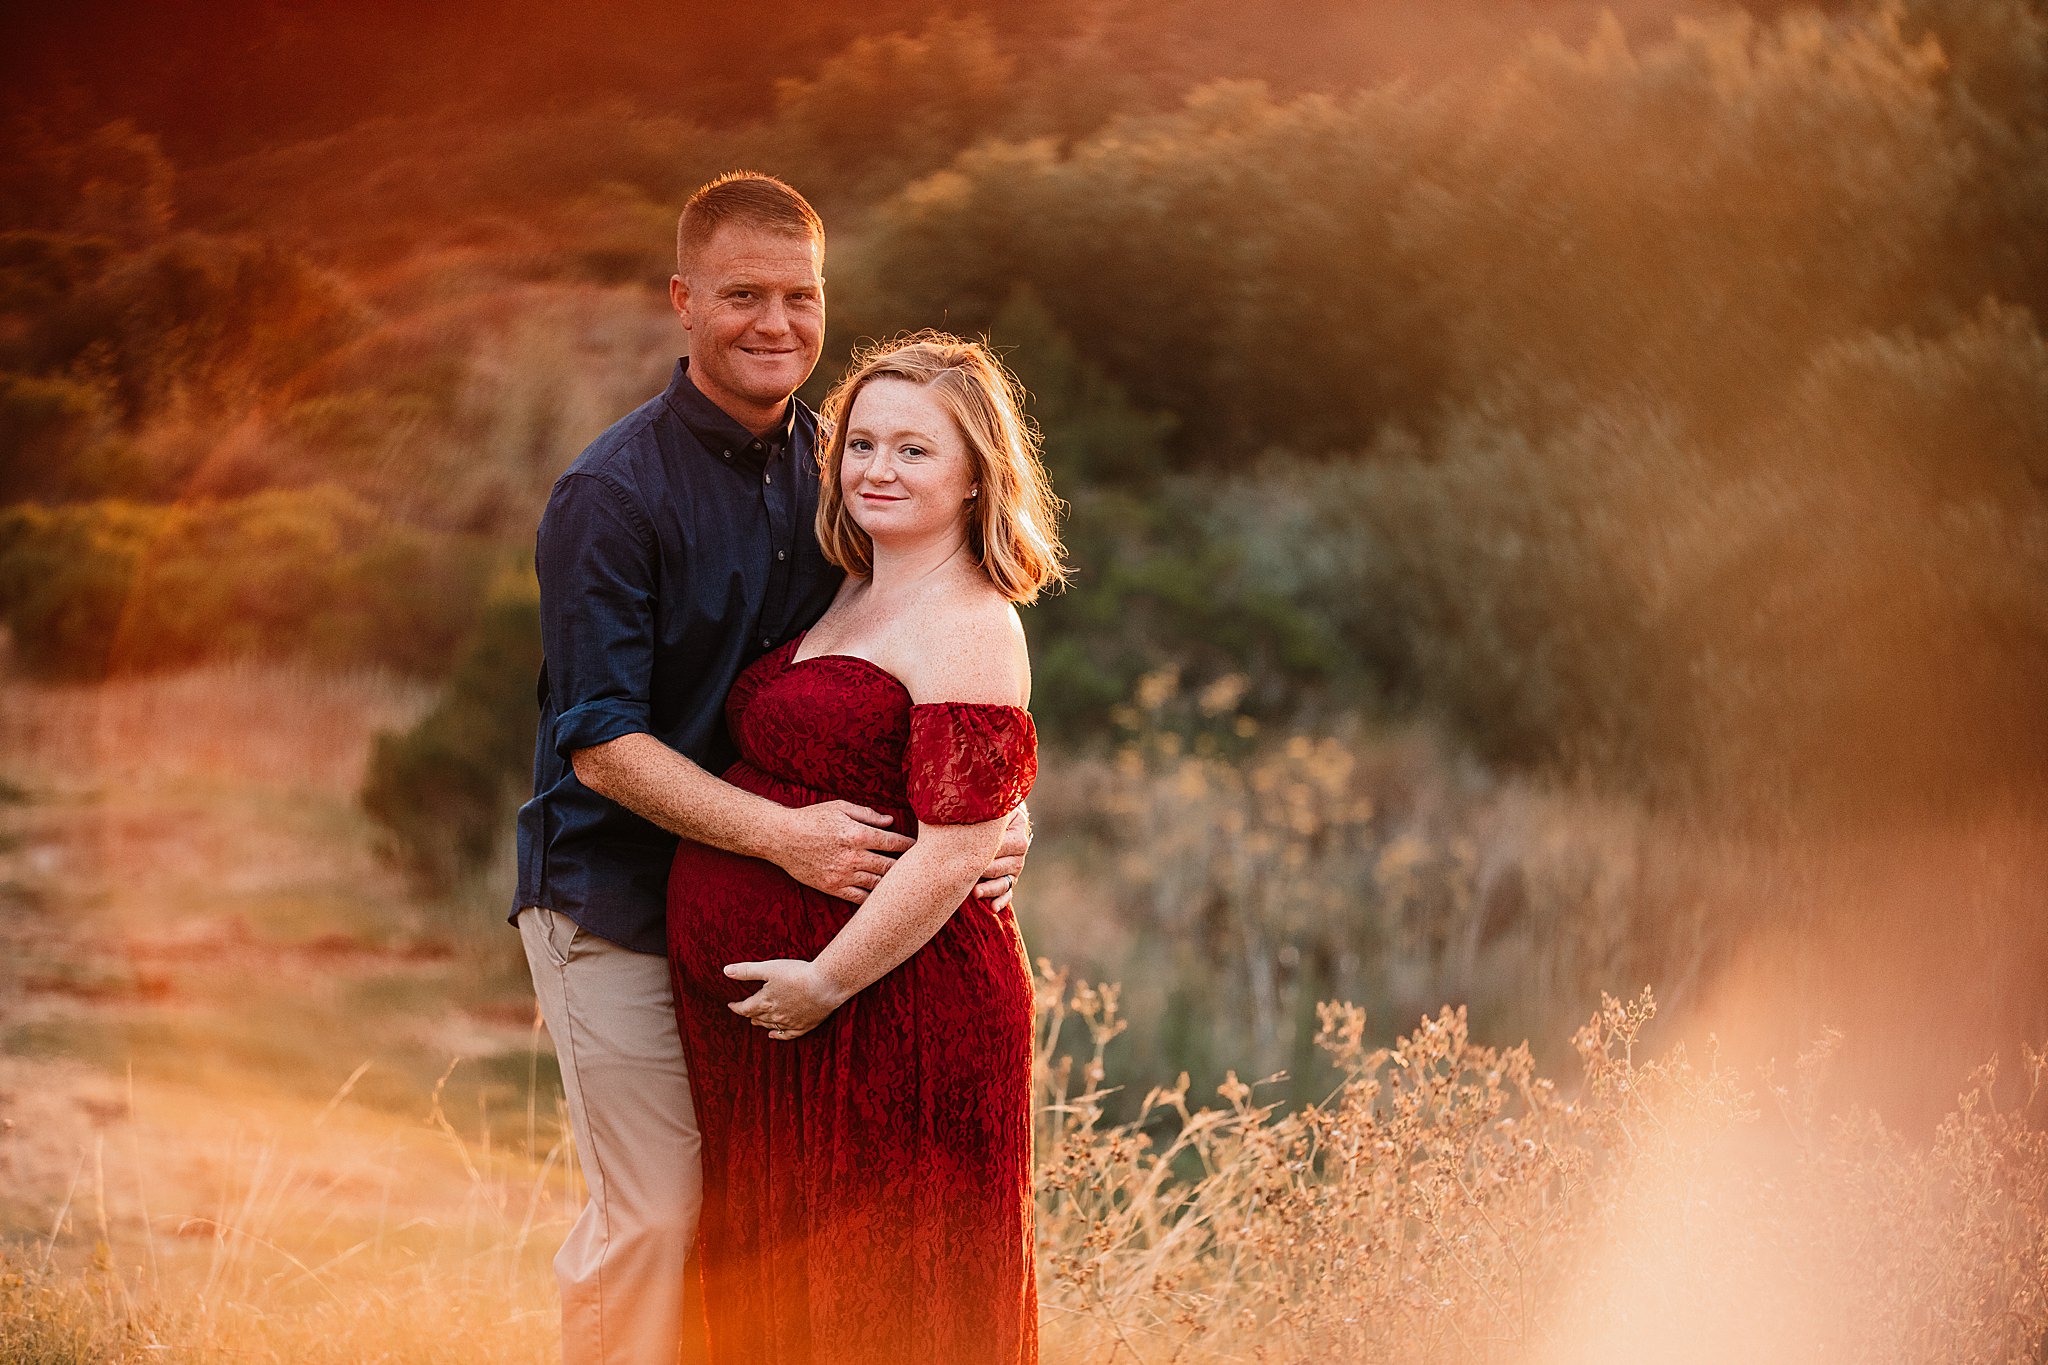 Carlsbad photography, oceanside photography, Carlsbad maternity photography, oceanside maternity photography, best maternity photography in San Diego